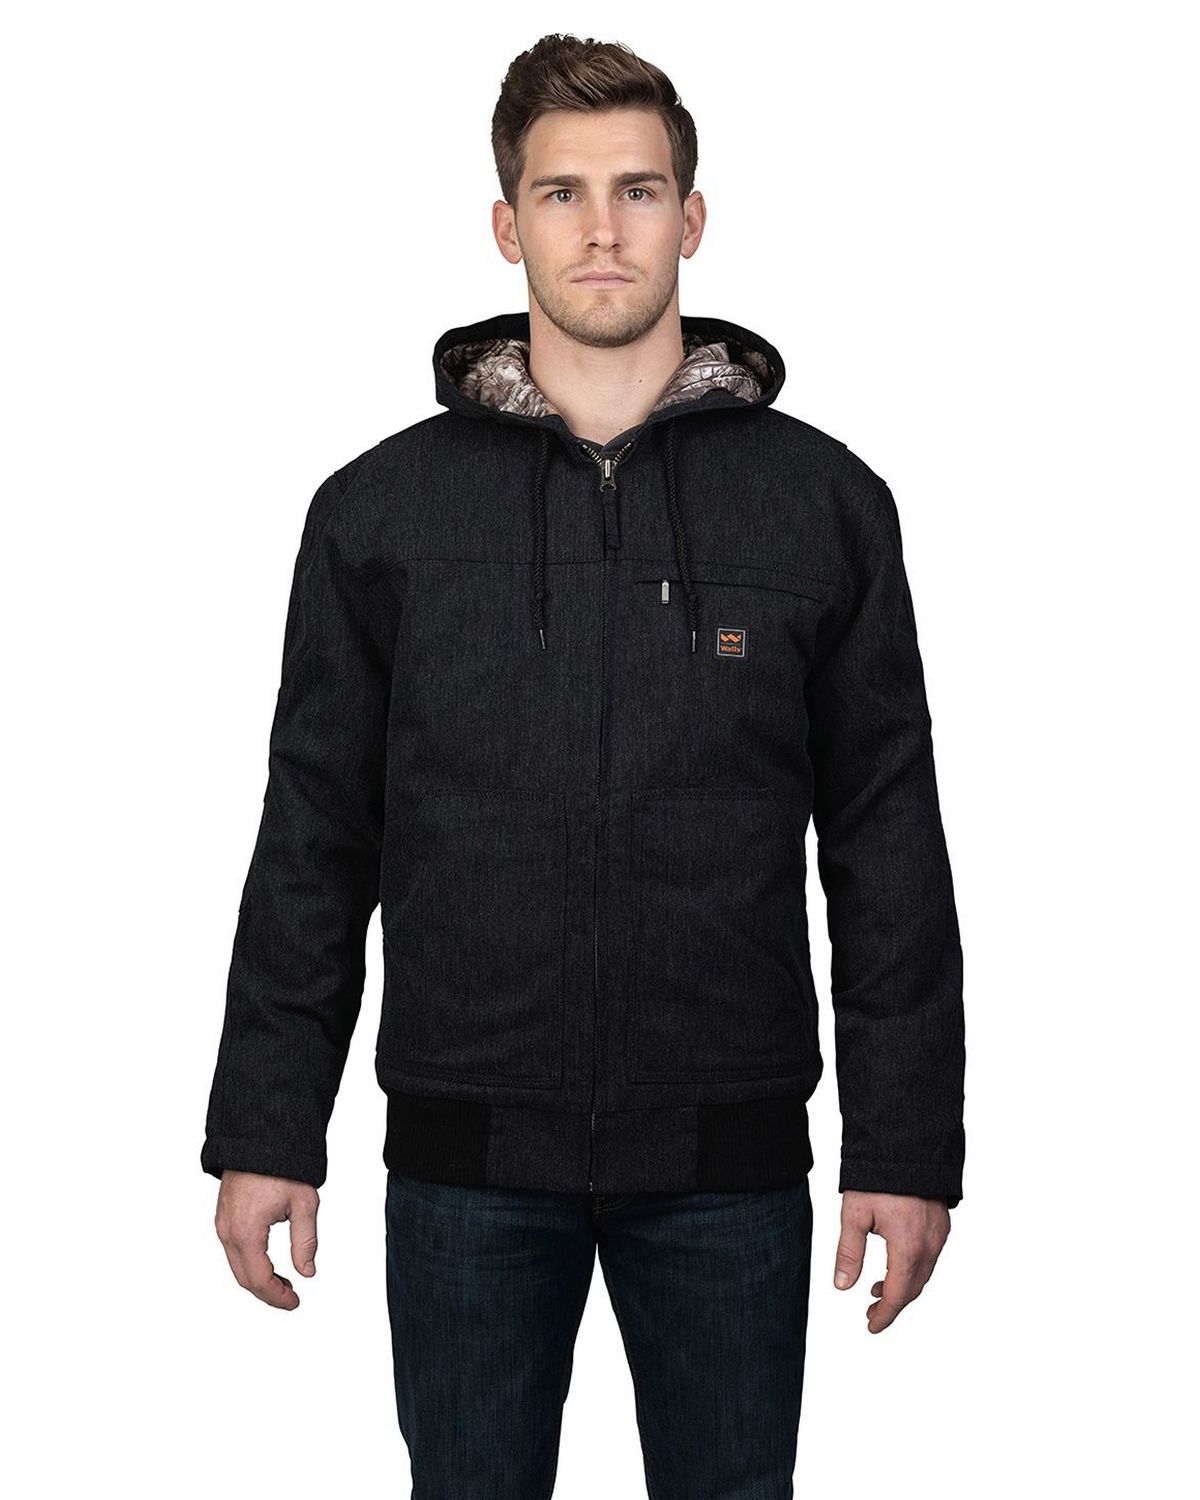 UPC 889440007639 product image for Walls Outdoor YJ524 Unisex Workwear Muscle Back Hooded Jacket with Kevlar - Midn | upcitemdb.com